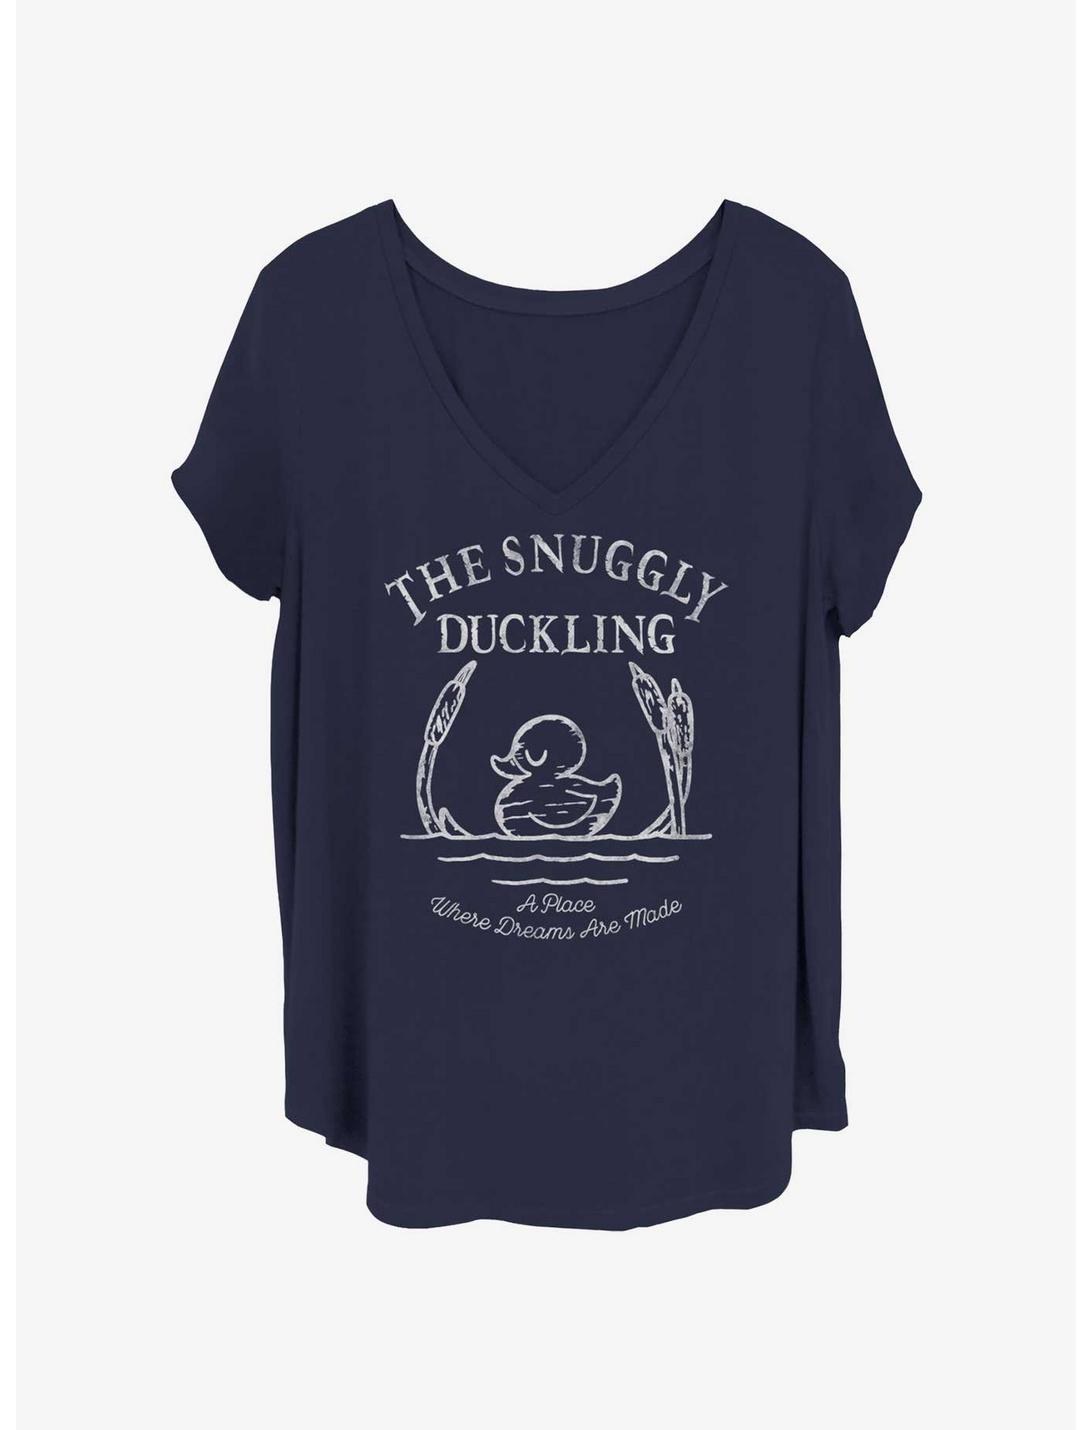 Disney Tangled Live Your Dream Girls T-Shirt Plus Size, NAVY, hi-res